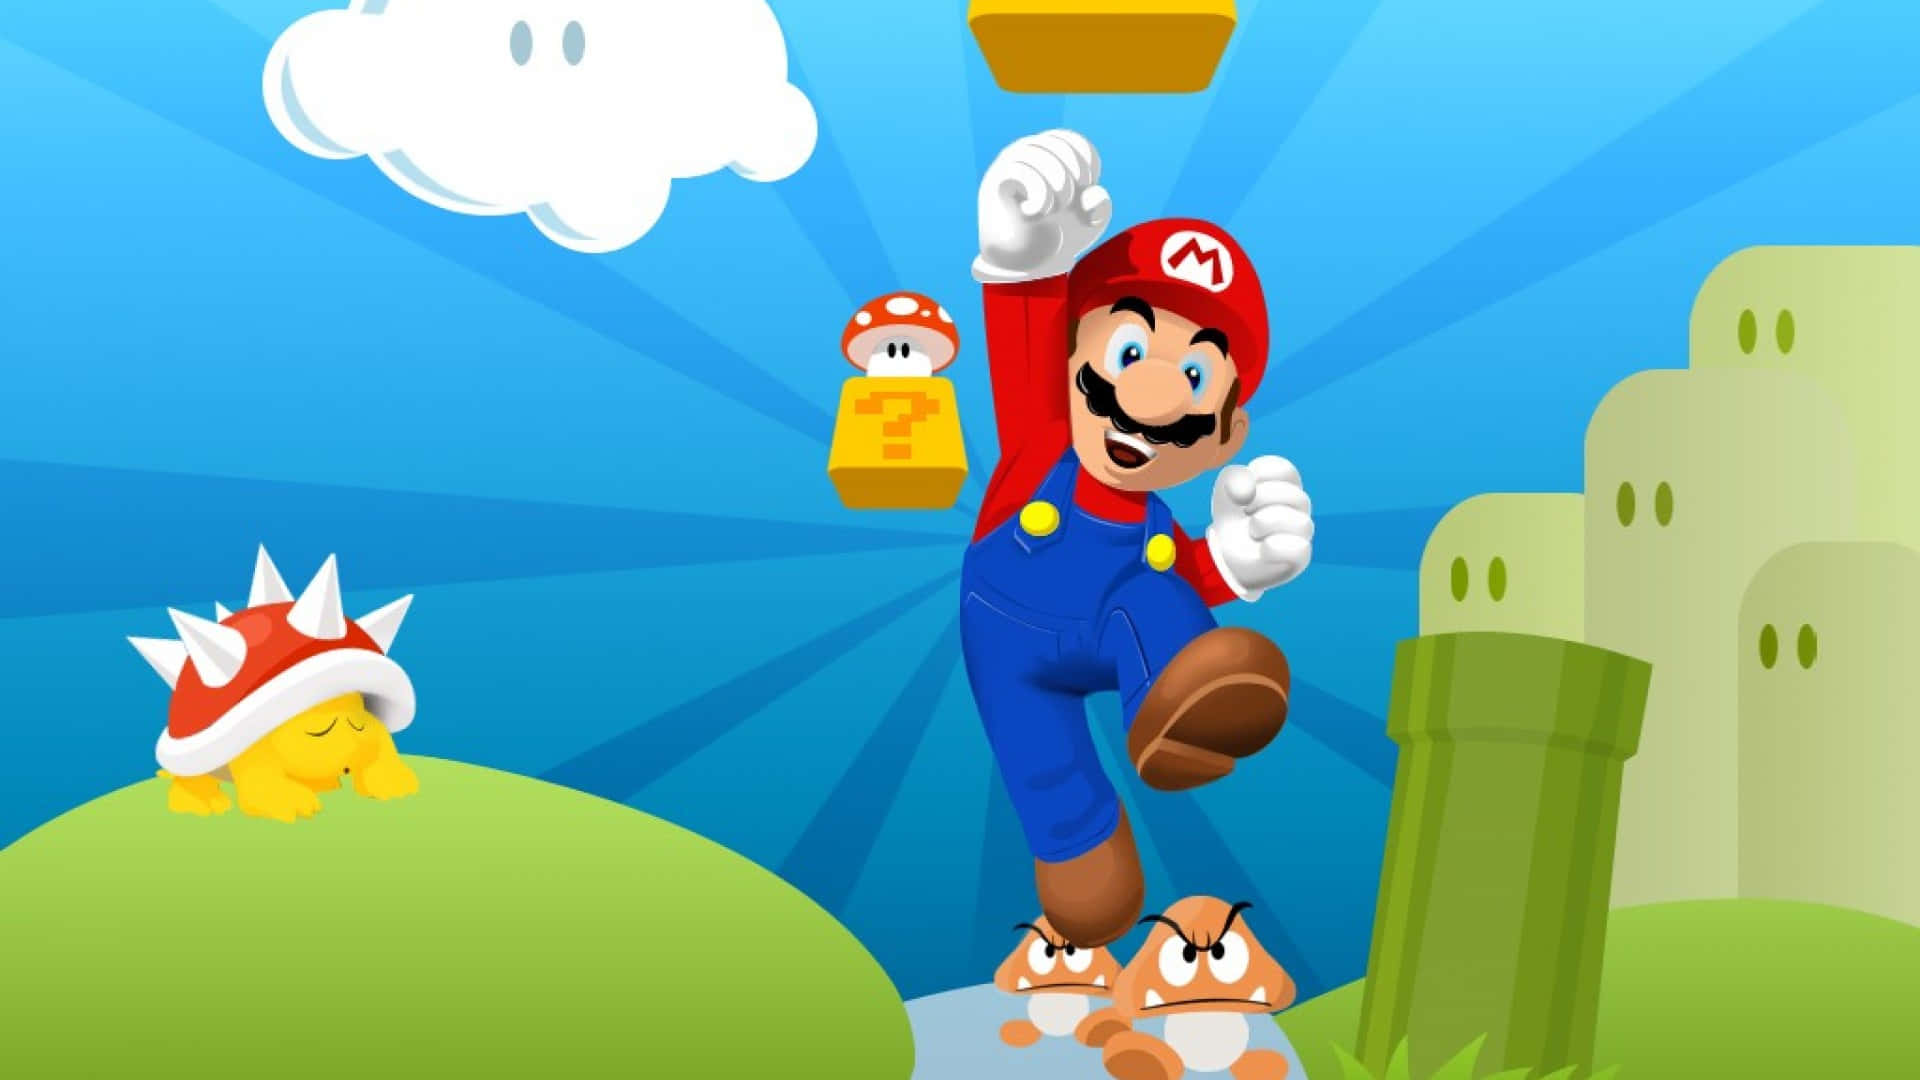 Cool Mario Strikes A Pose In This Iconic Video Game Scene. Background